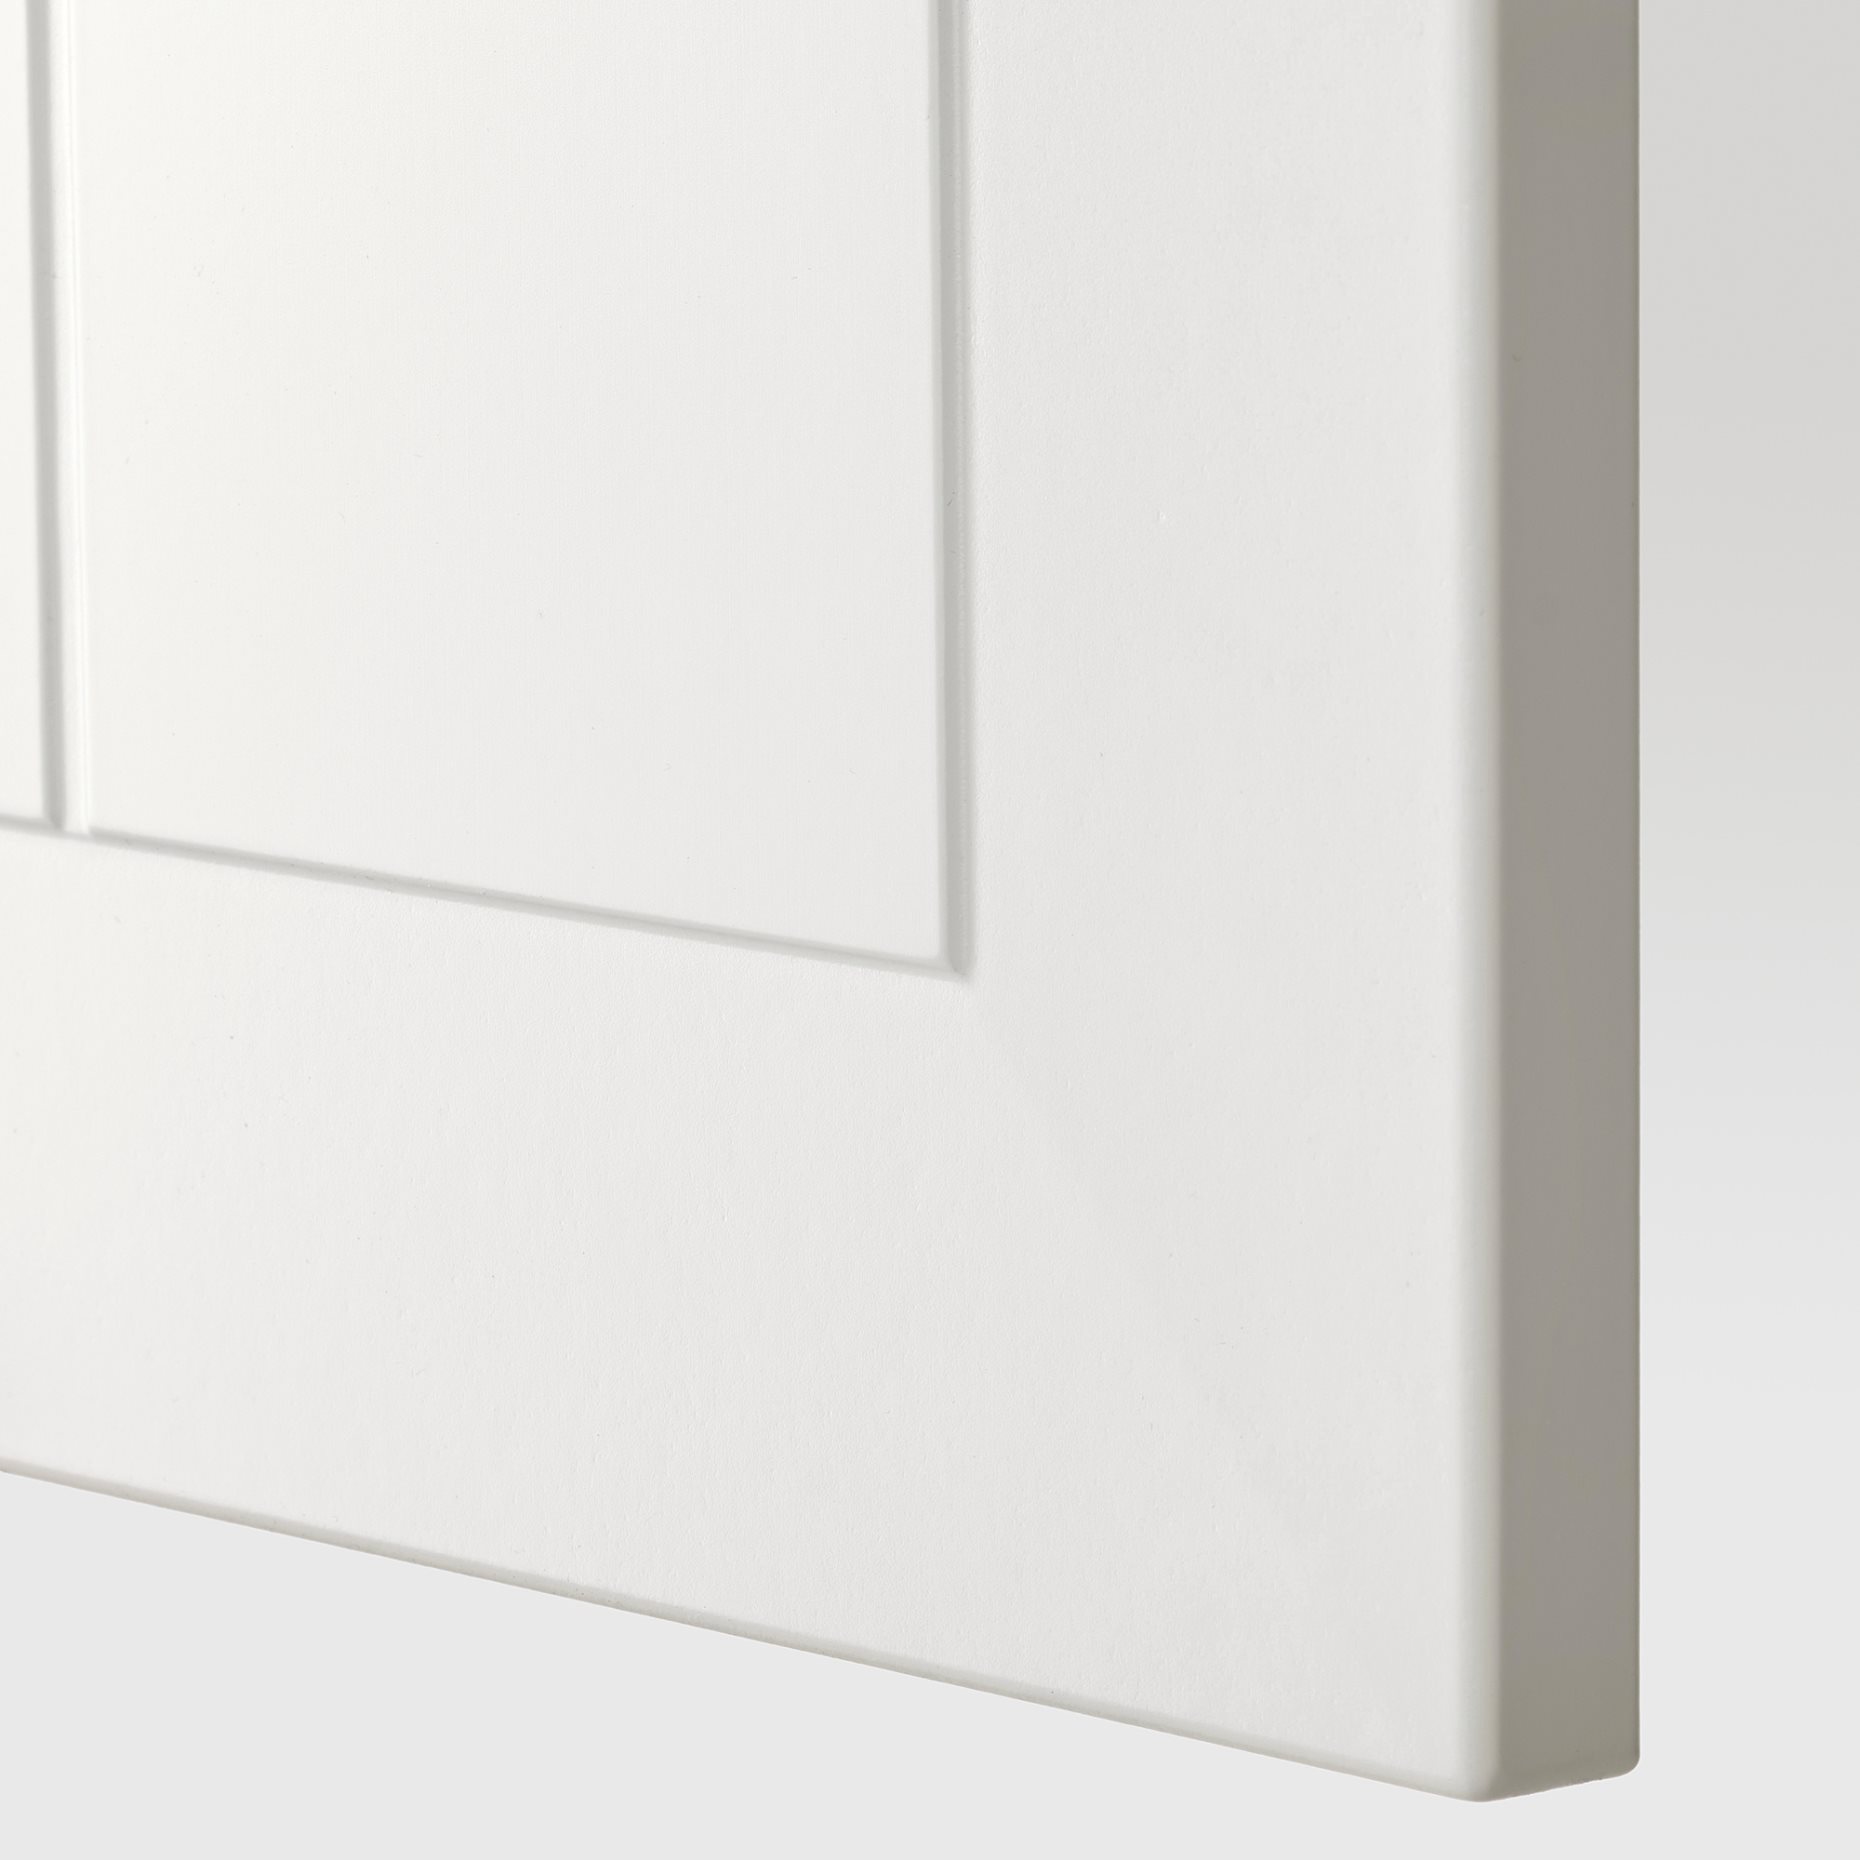 METOD, wall cabinet with shelves, 60x80 cm, 594.678.74